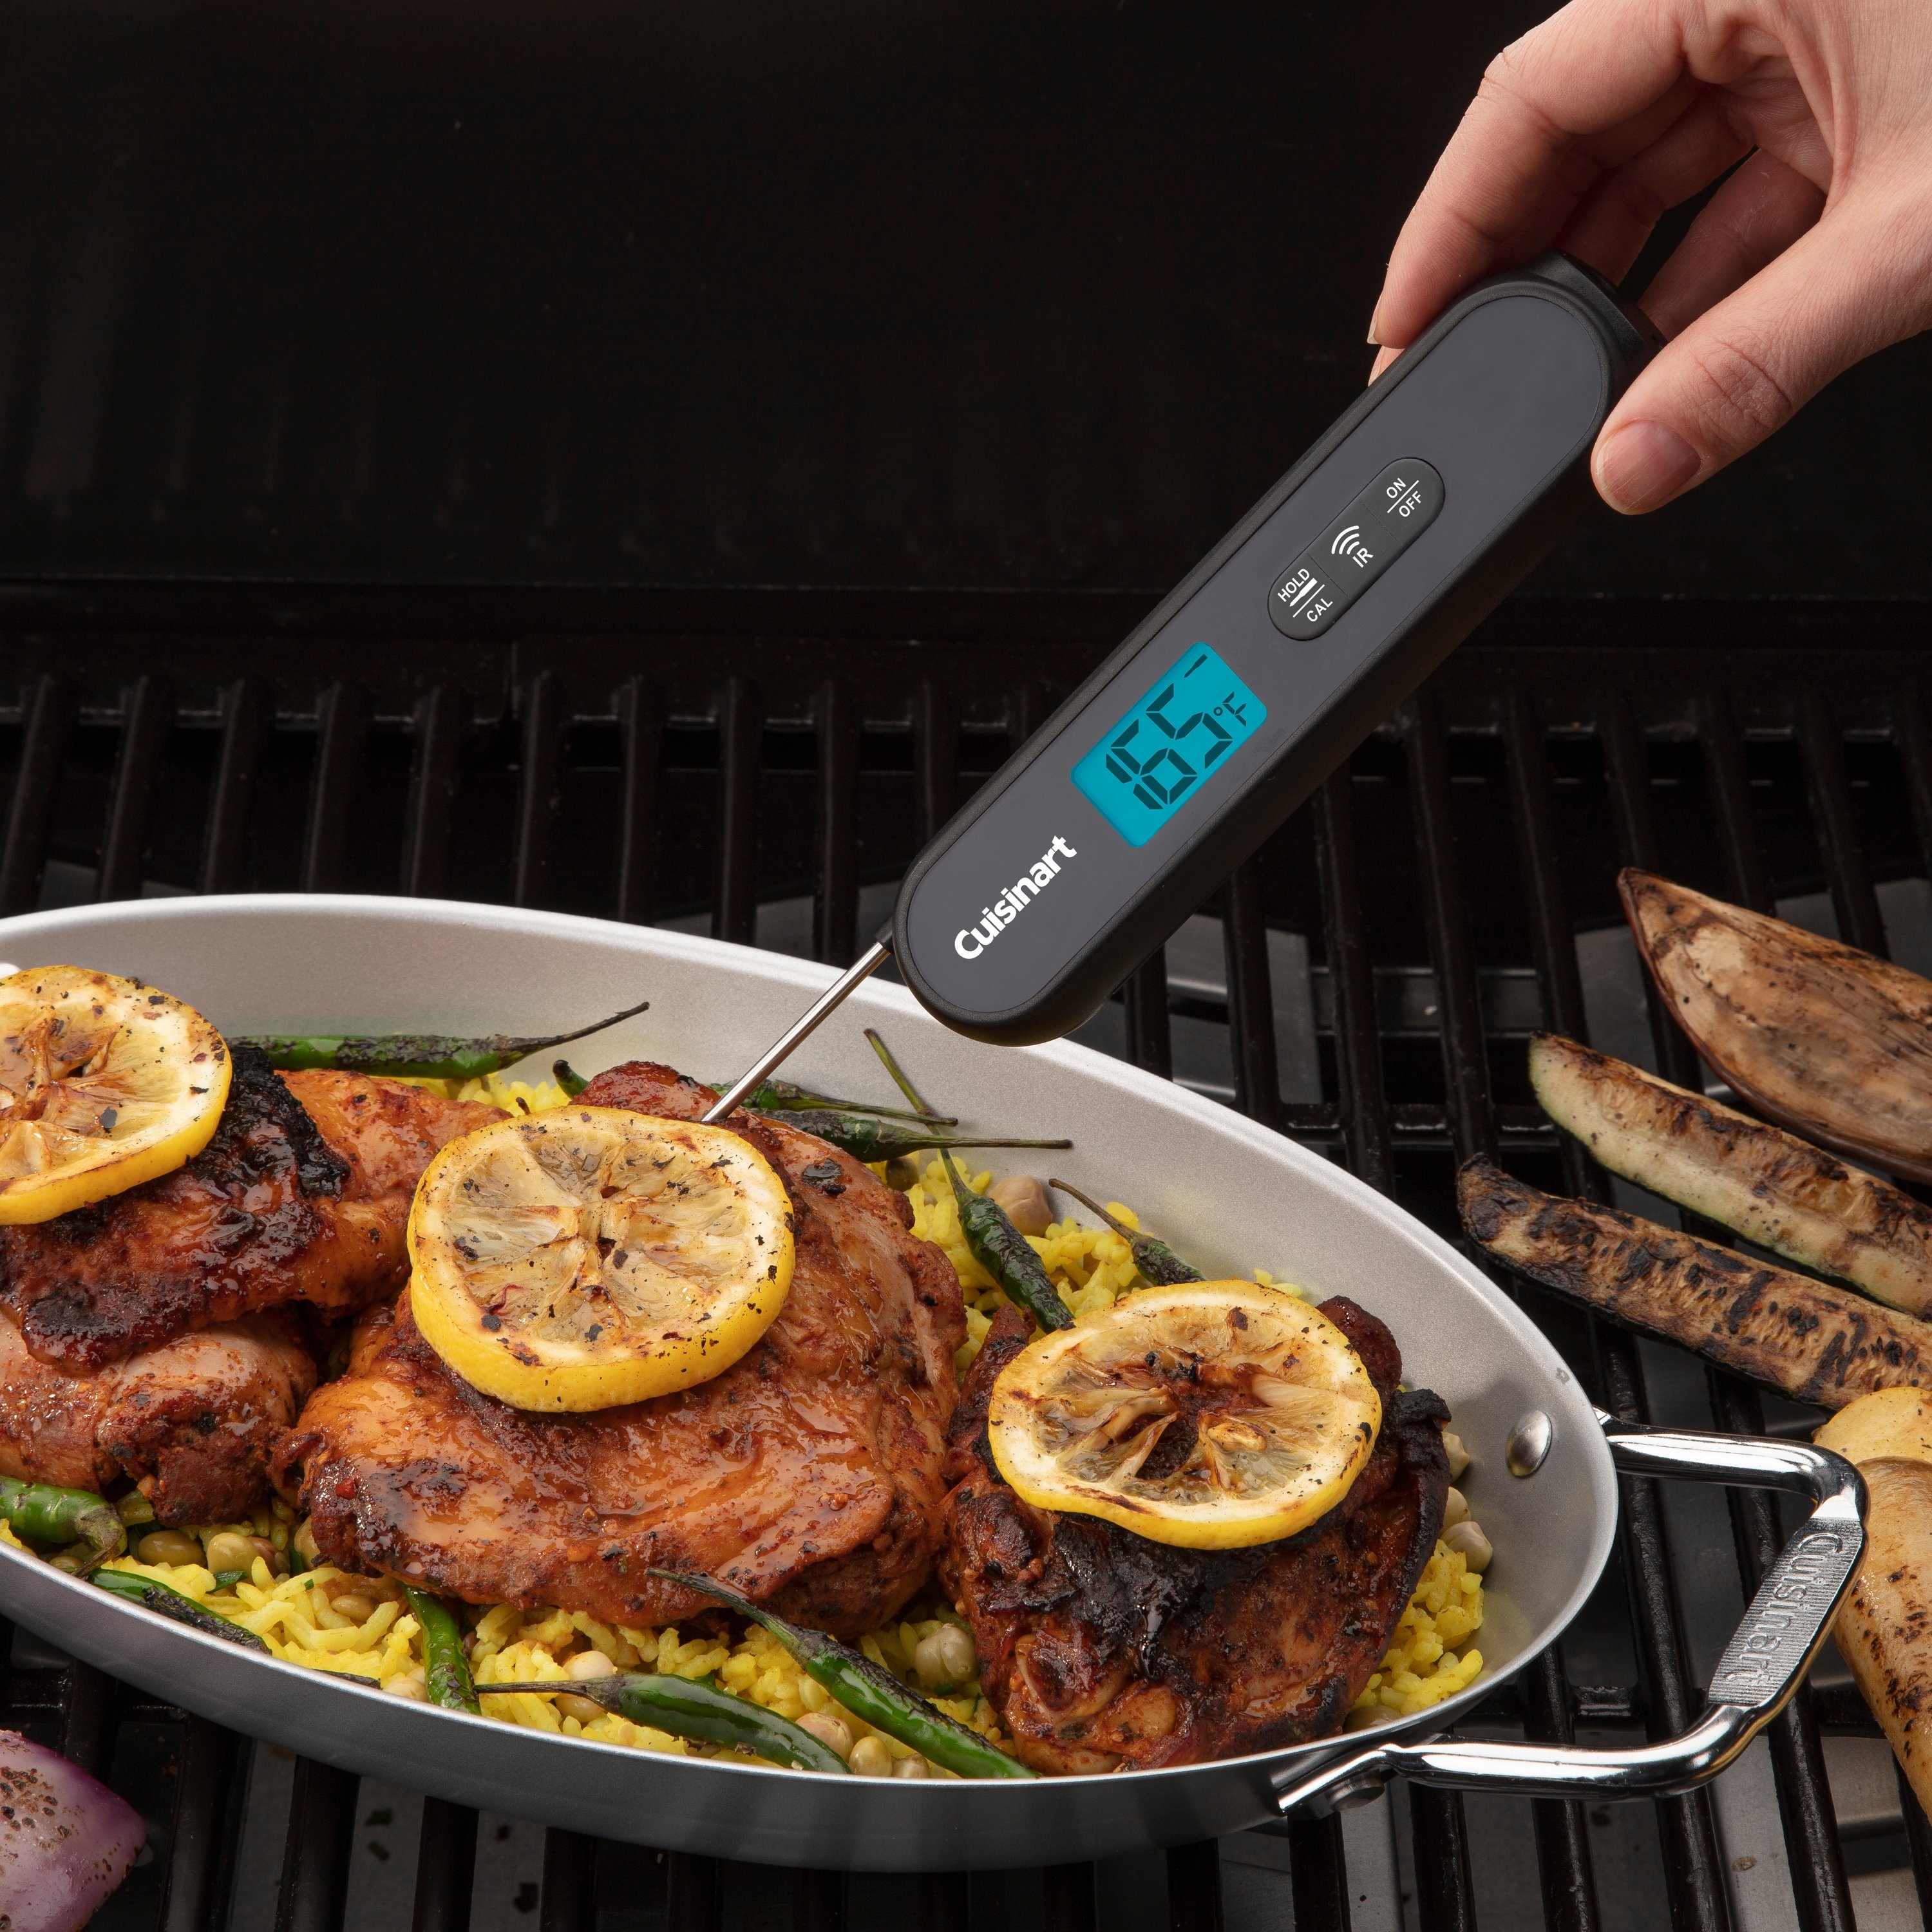 Meat Thermometer - Cuisinart.com